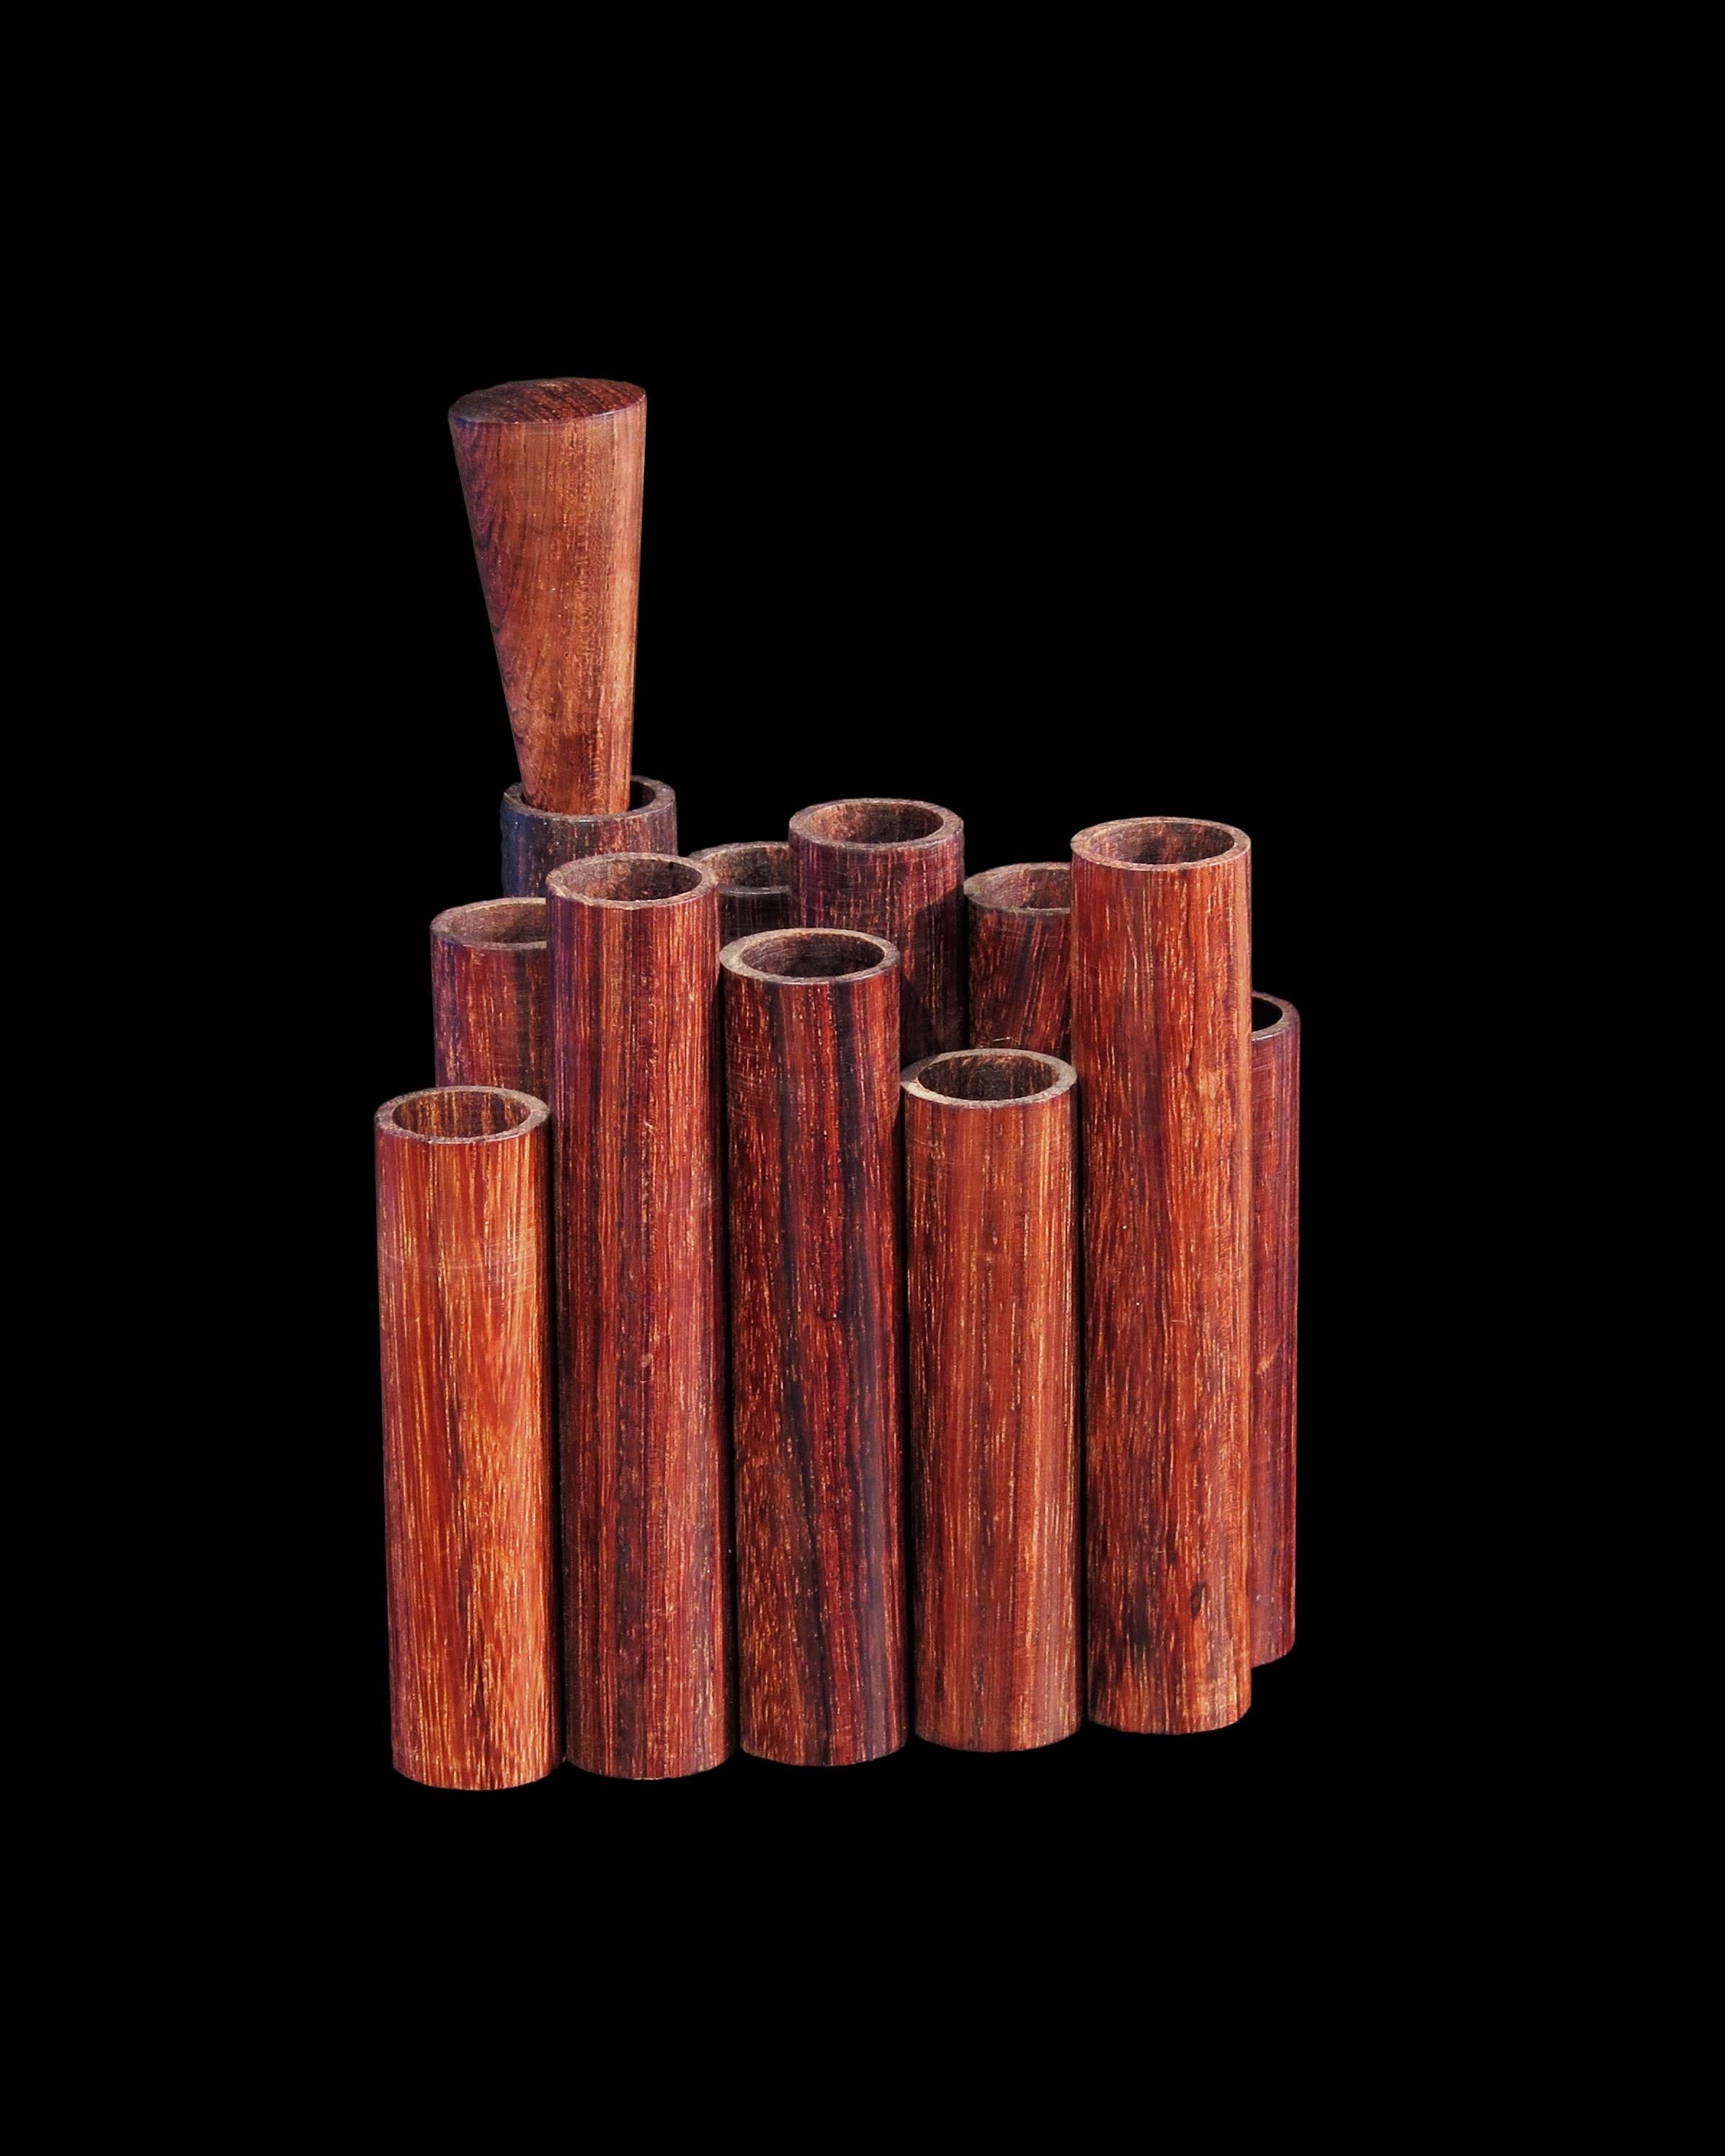 A highly sculptural Mid-Century pen or pencil holder and temper by Sergio Dello Strologo for Xilarte, Milano, Italy.

Crafted of finely figured, turned walnut. The 12 slender, cylindrical tubes of varying heights joined together to form a body